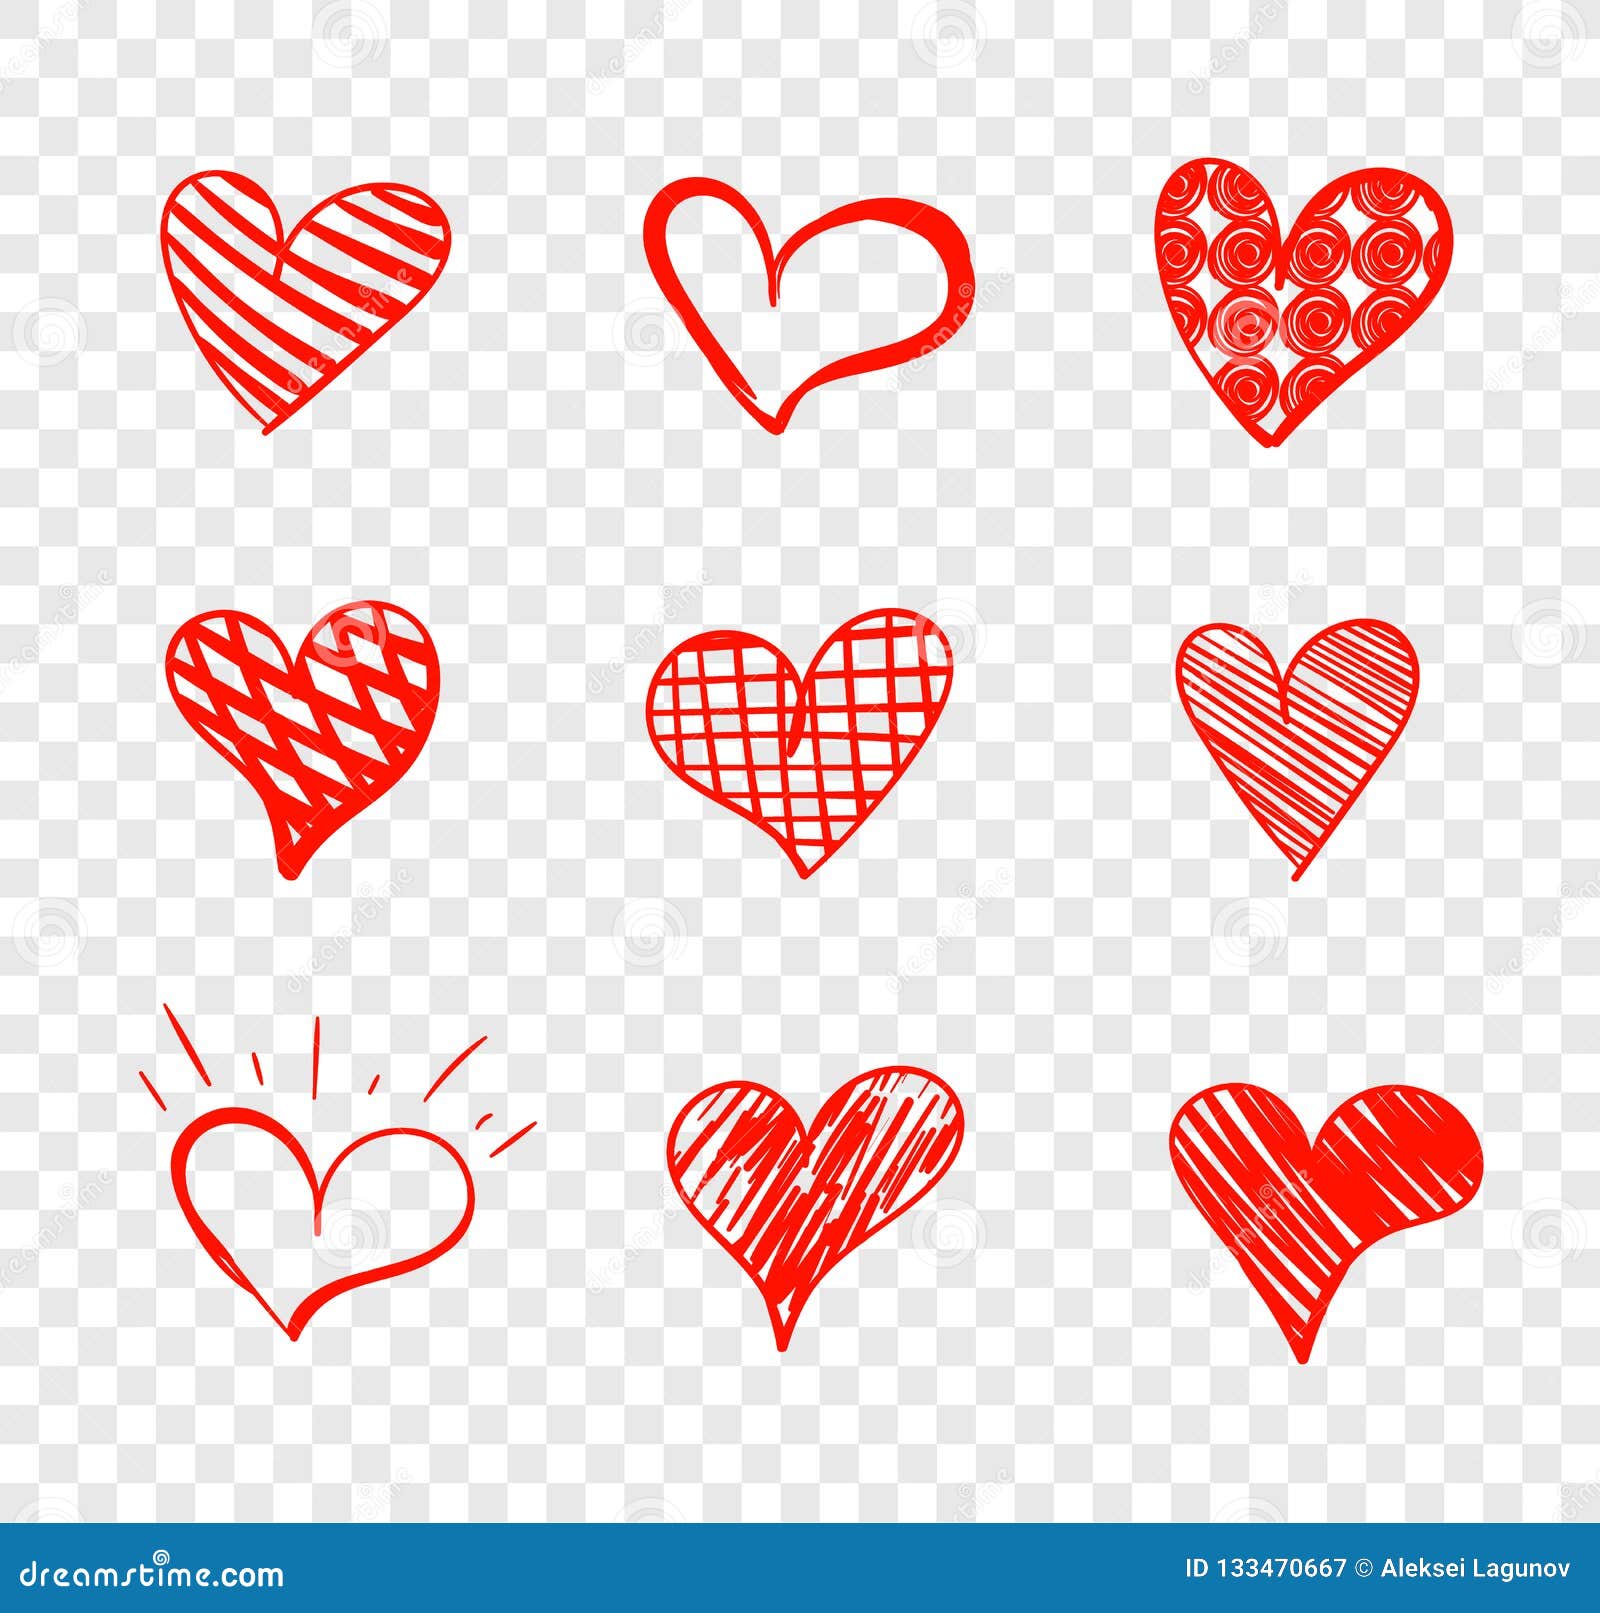 Vector Set of Doodle Hearts Isolated on Transparent Background, Red ...